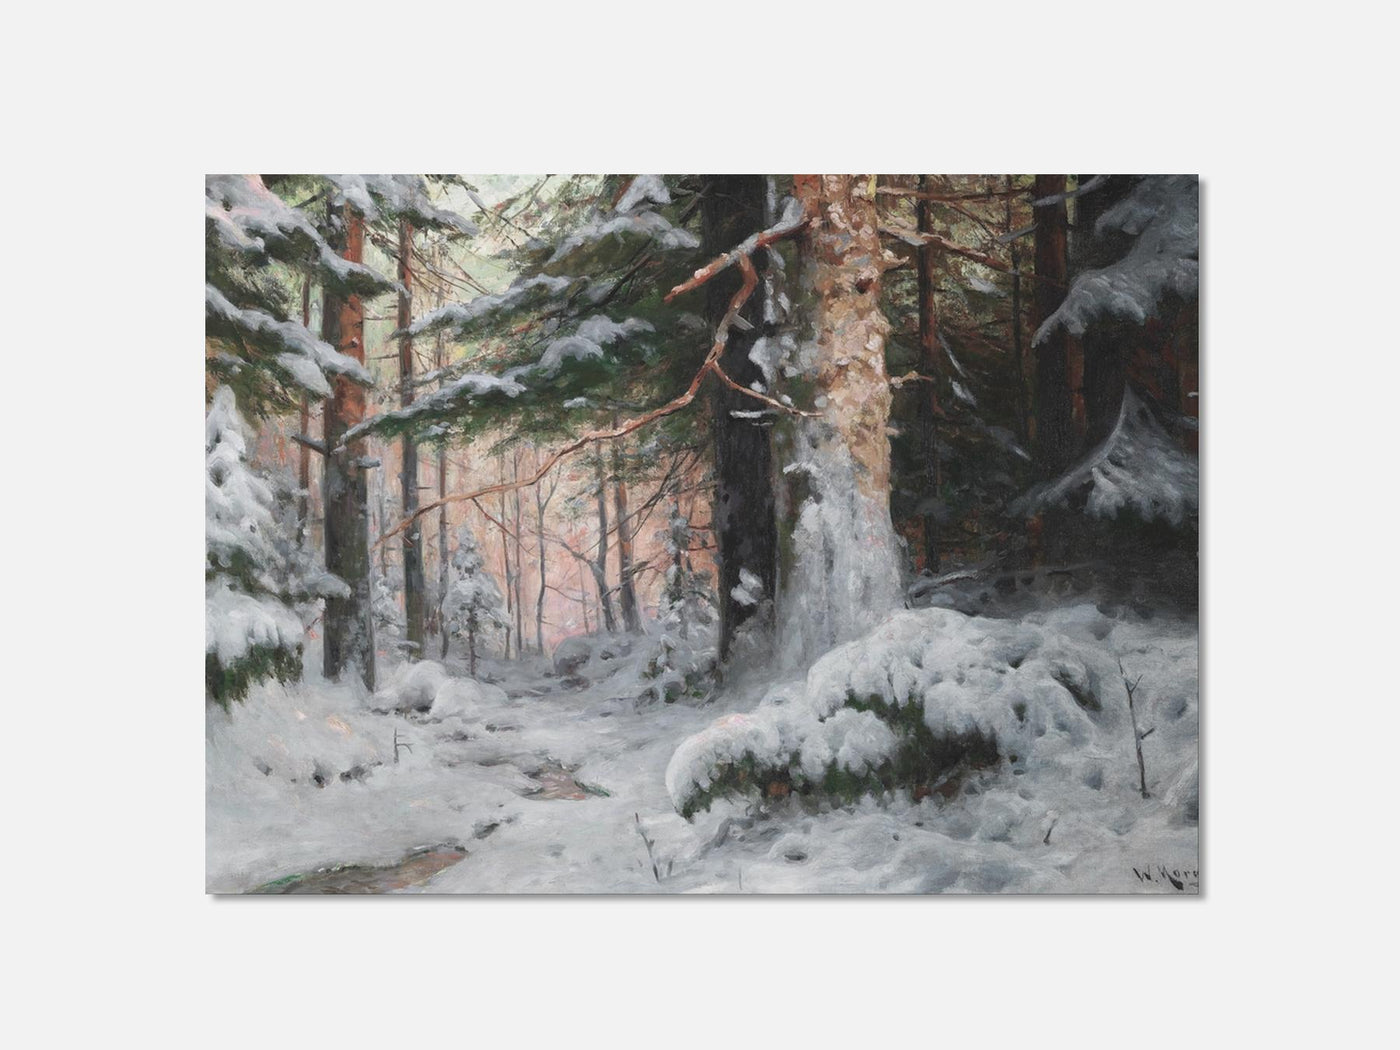 The Snowy Pine Forest mockup - A_w31-V1-PC_AP-SS_1-PS_5x7-C_def variant